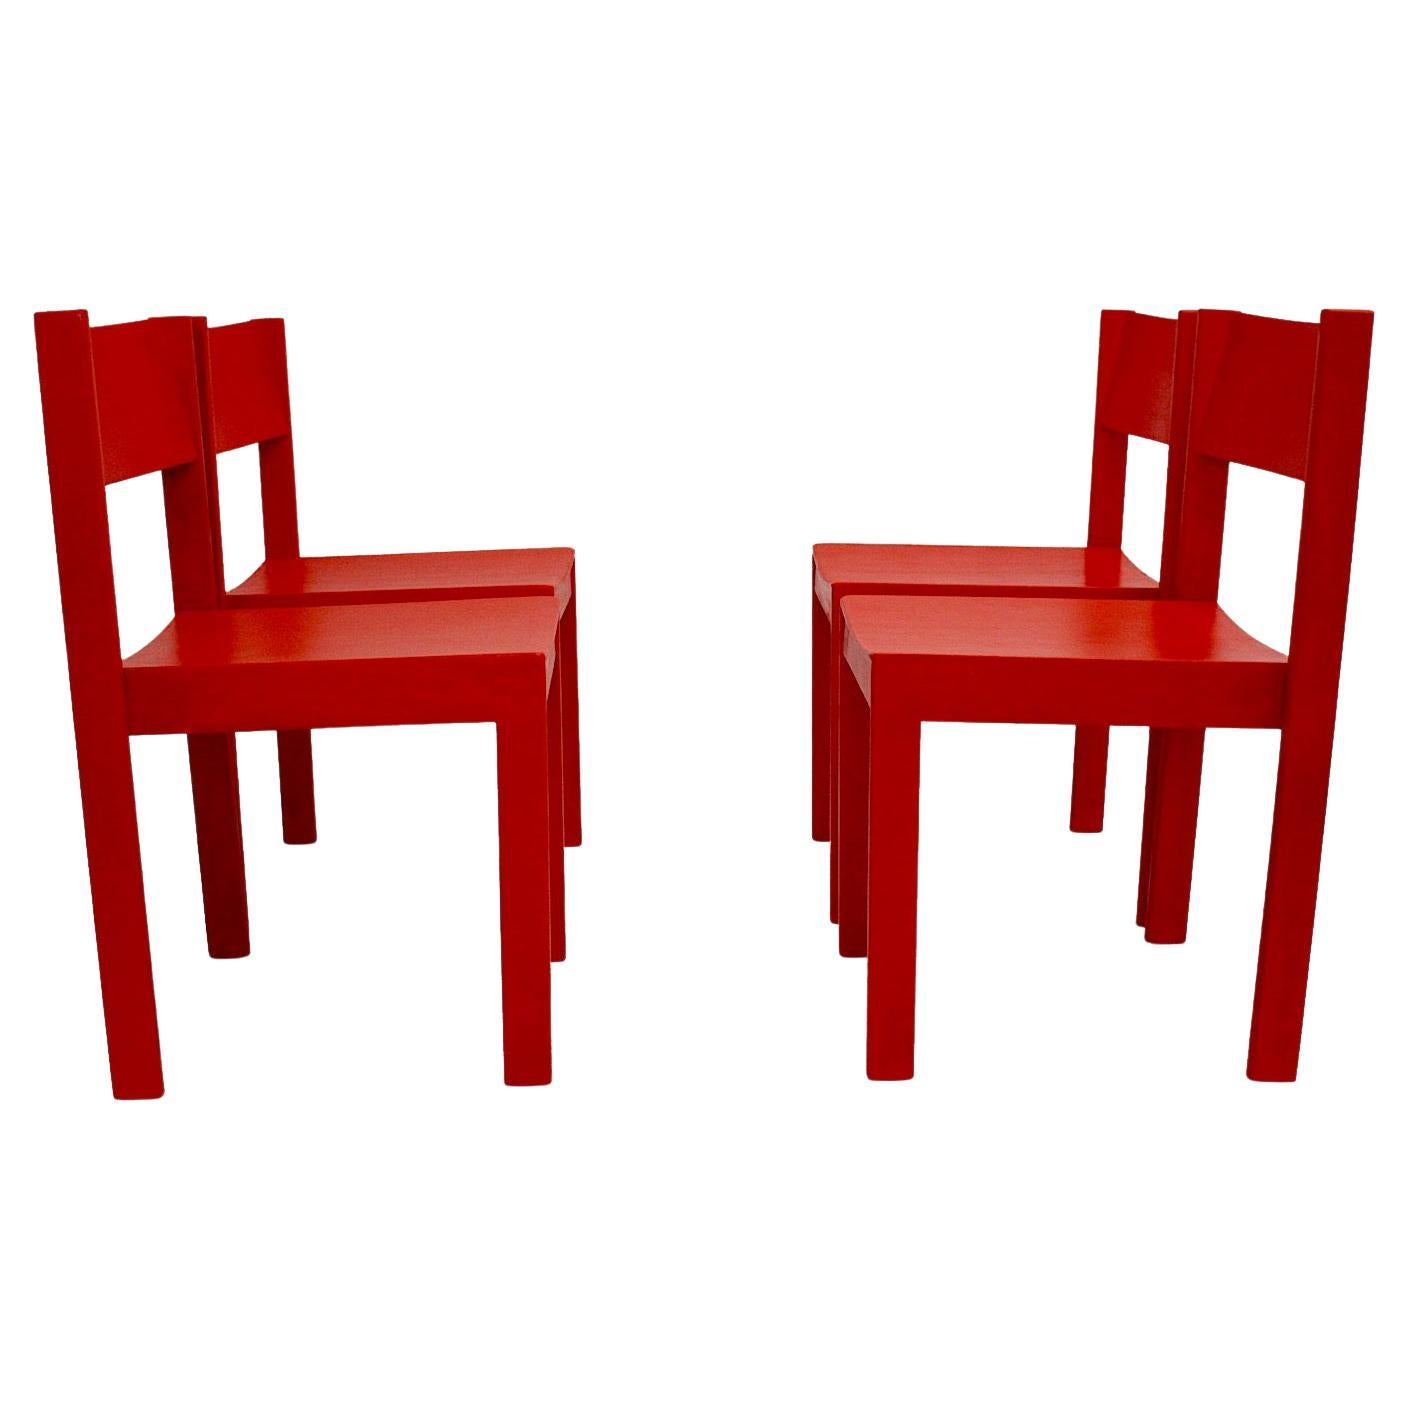 Mid-Century Modern Four Red Beech Dining Room Chairs or Chairs 1950s Austria